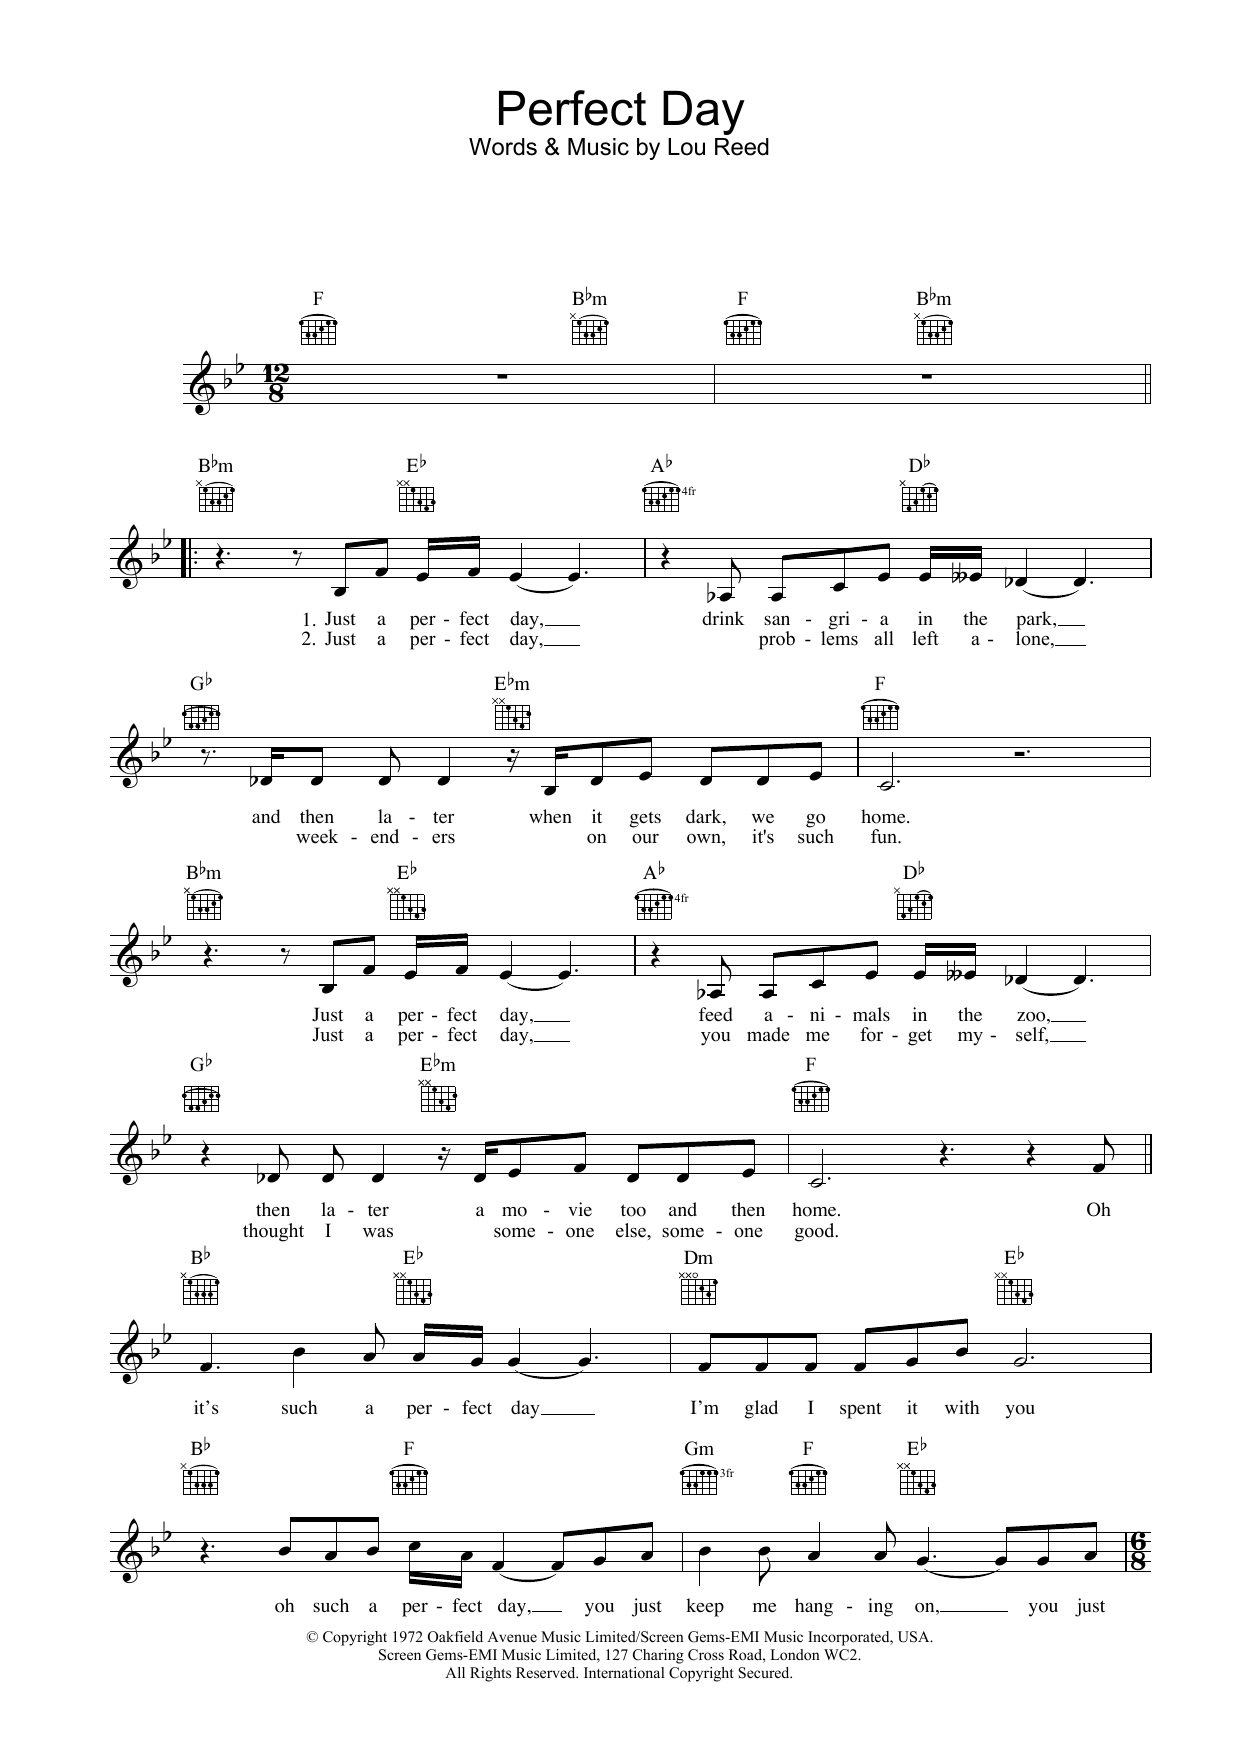 Download Lou Reed Perfect Day Sheet Music